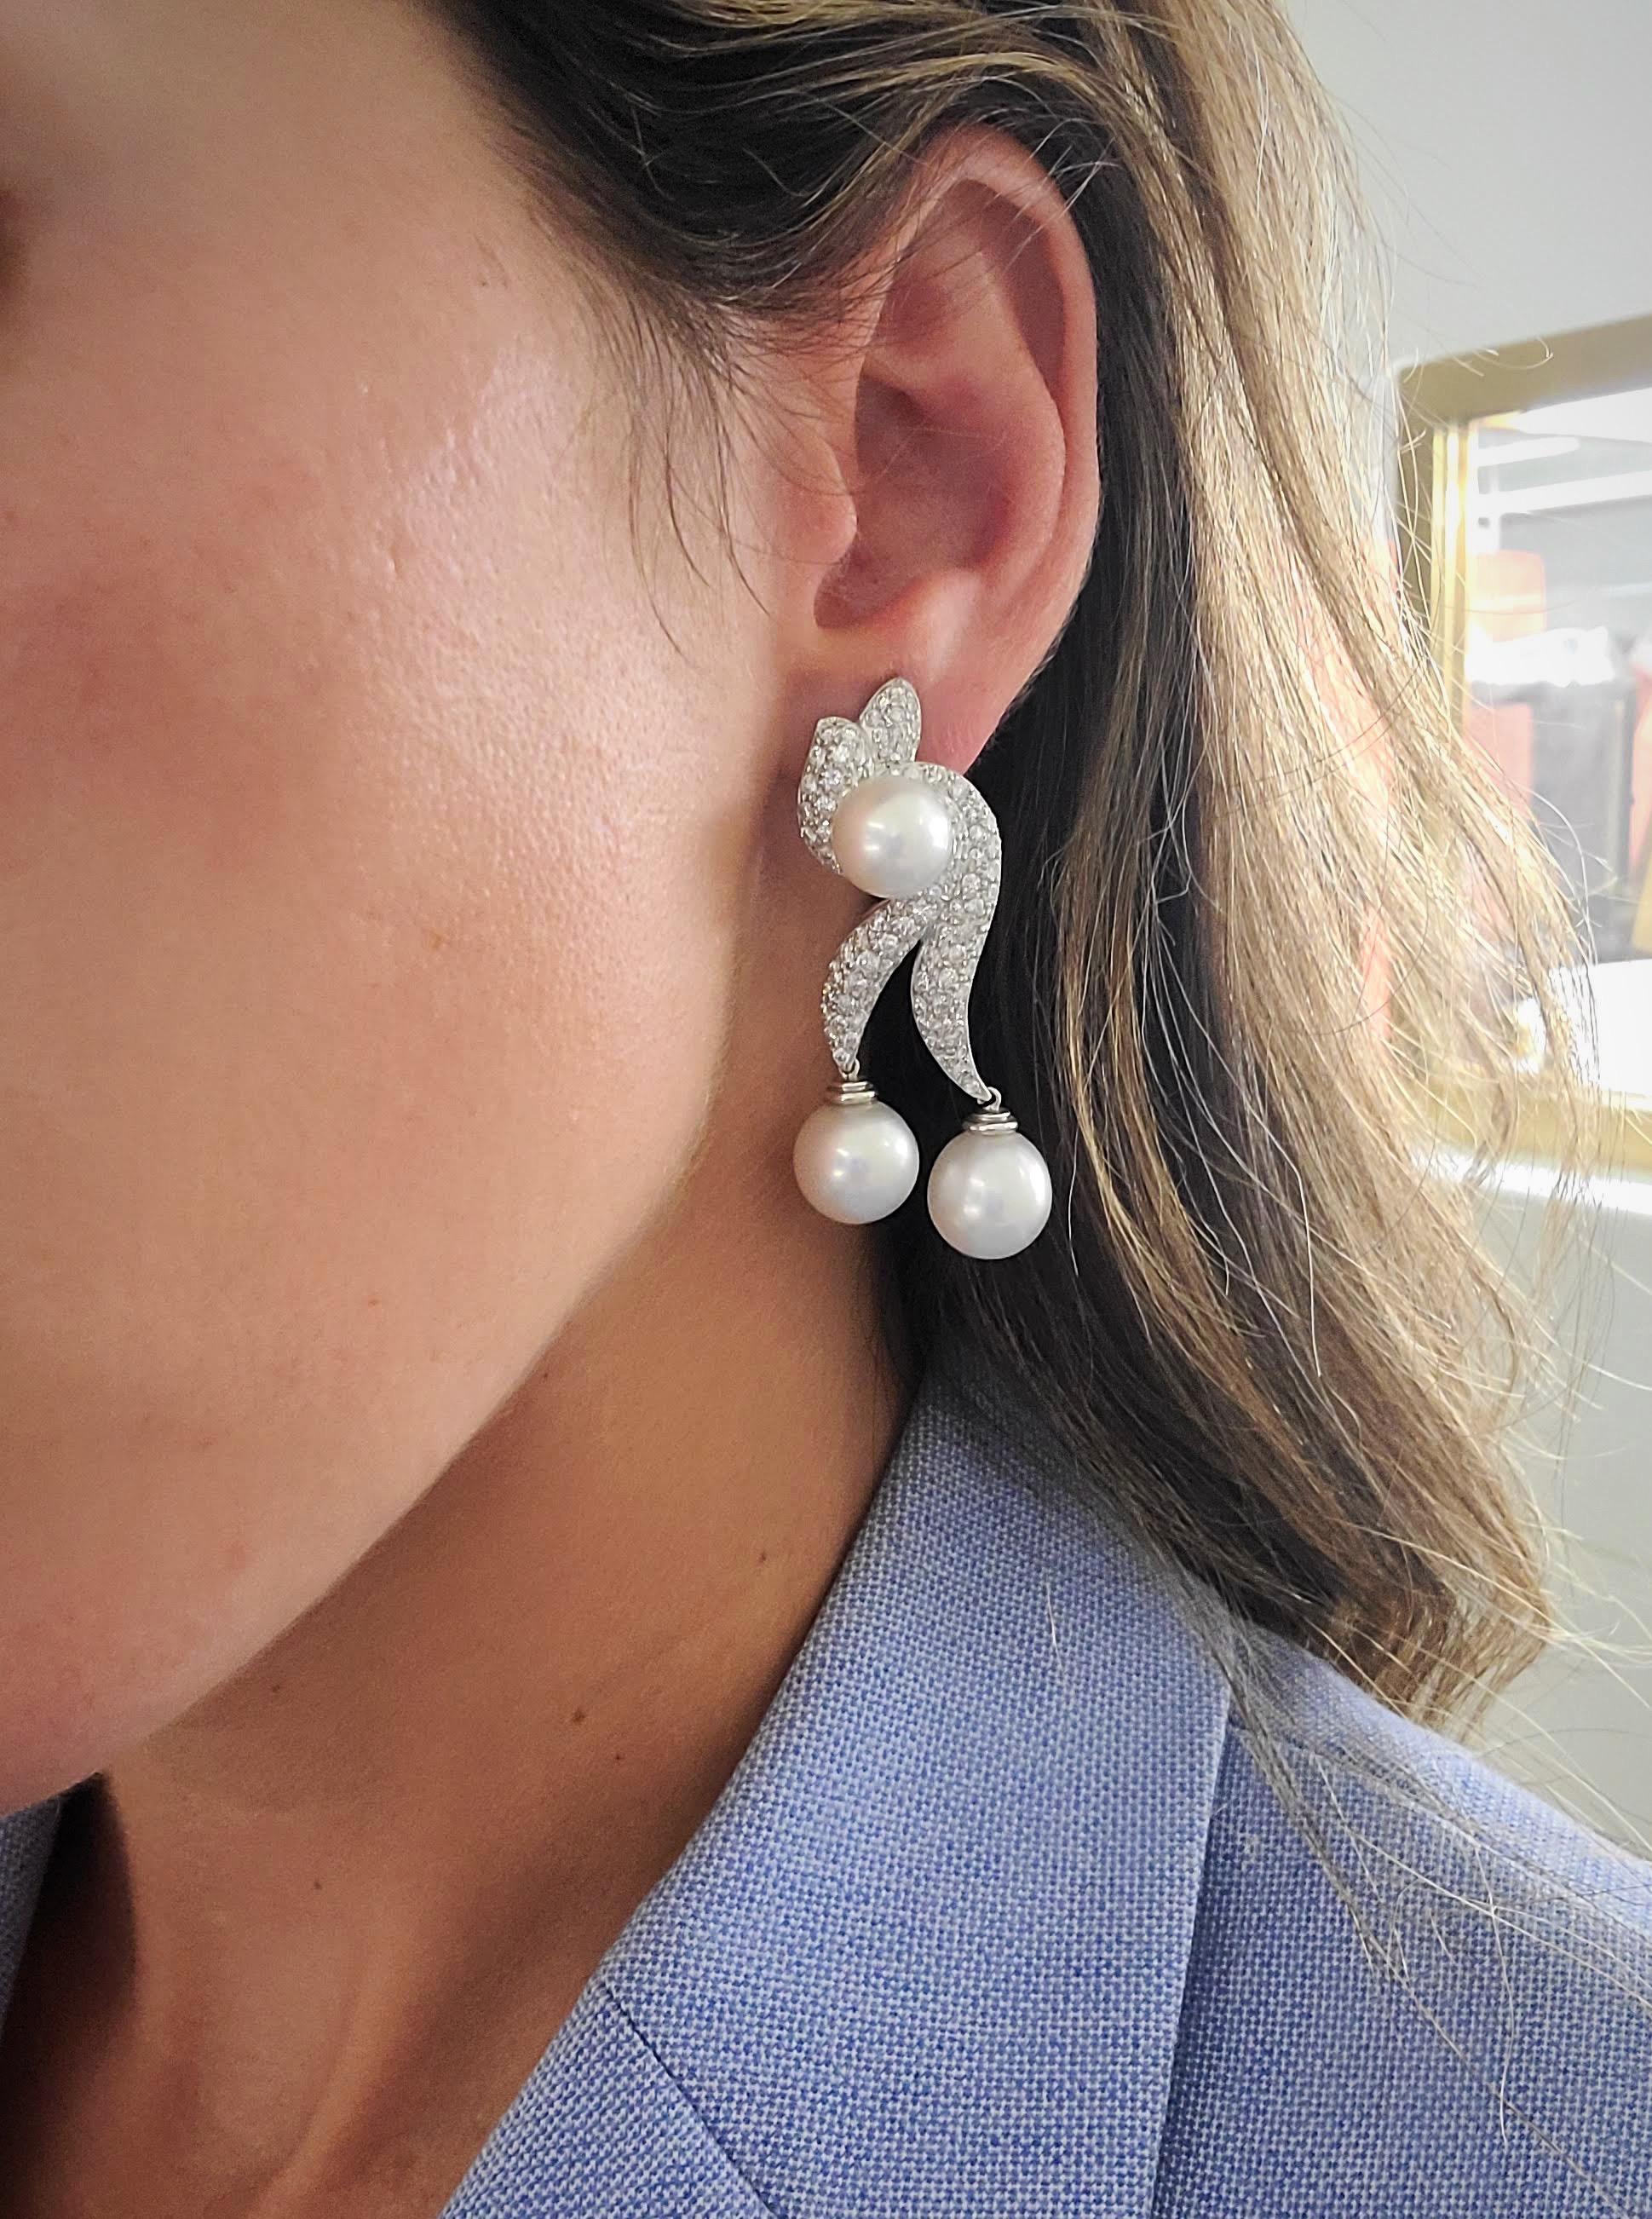 These 18 karat white gold earrings by Cellini Jewelers NYC are designed with 2 swirls set with pave Diamonds.  A South Sea Pearl sits at the center of the earring, and 2 more South Sea Pearls dangle from the bottom of the Diamond swirls. These